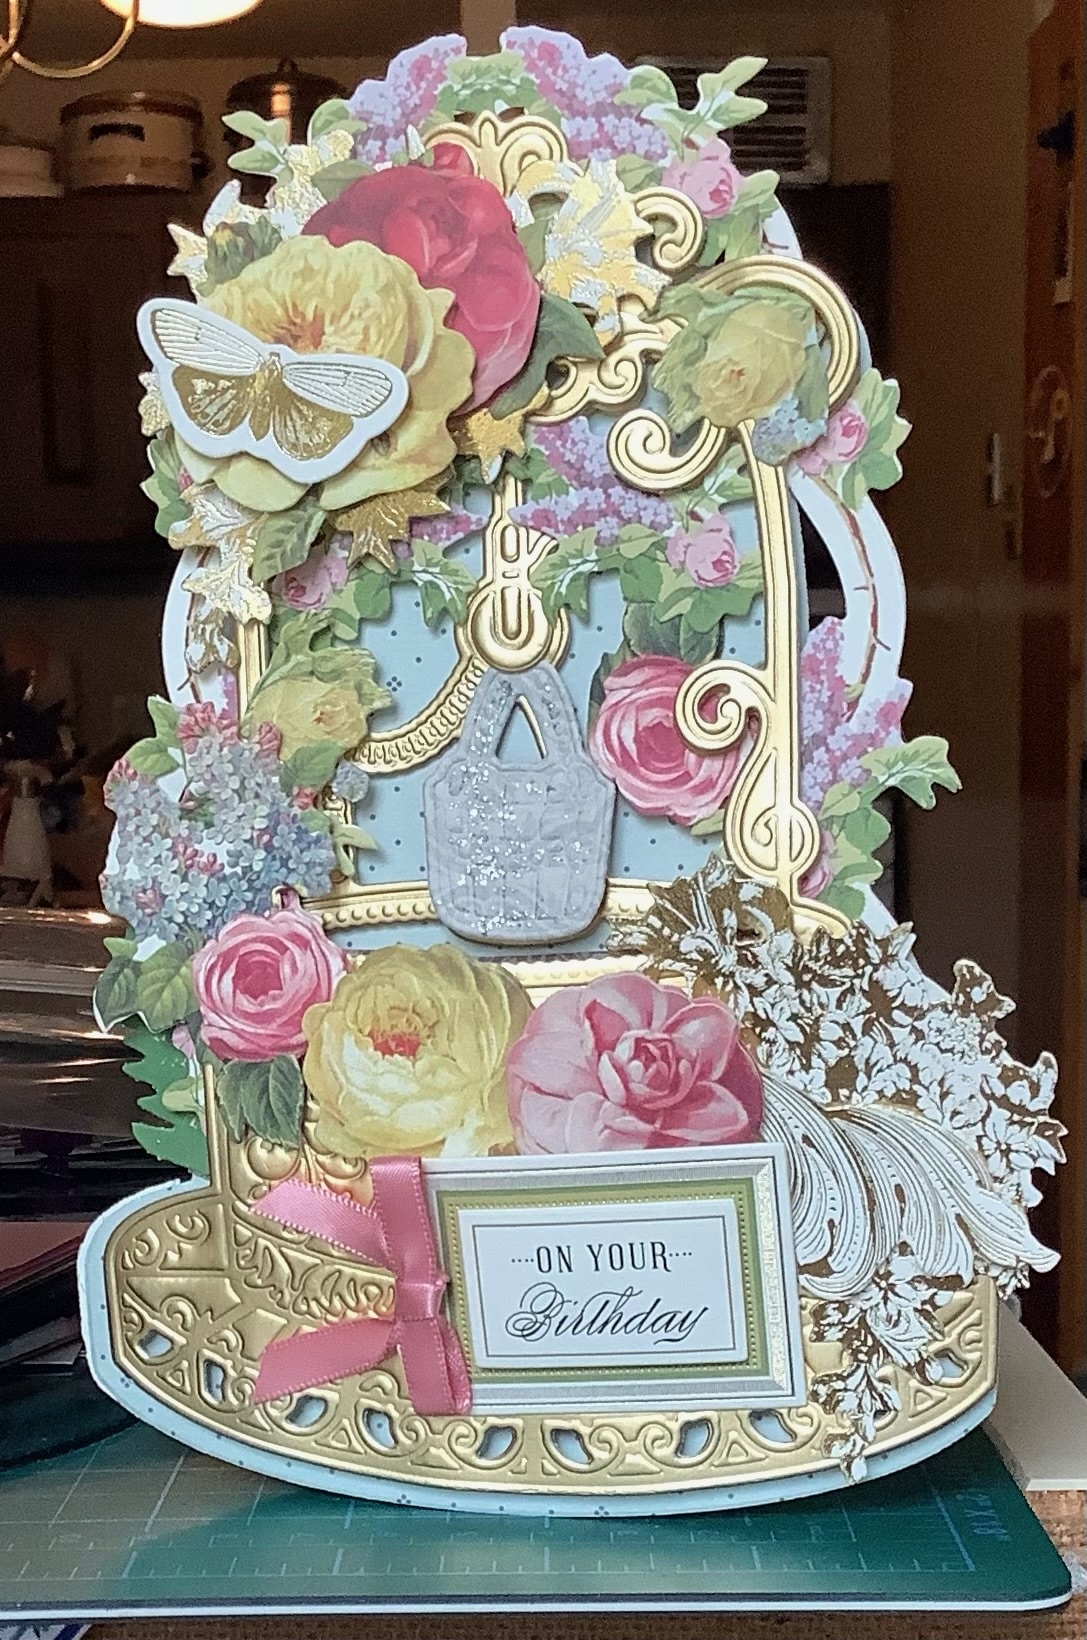 A card with a gold frame and flowers on it.